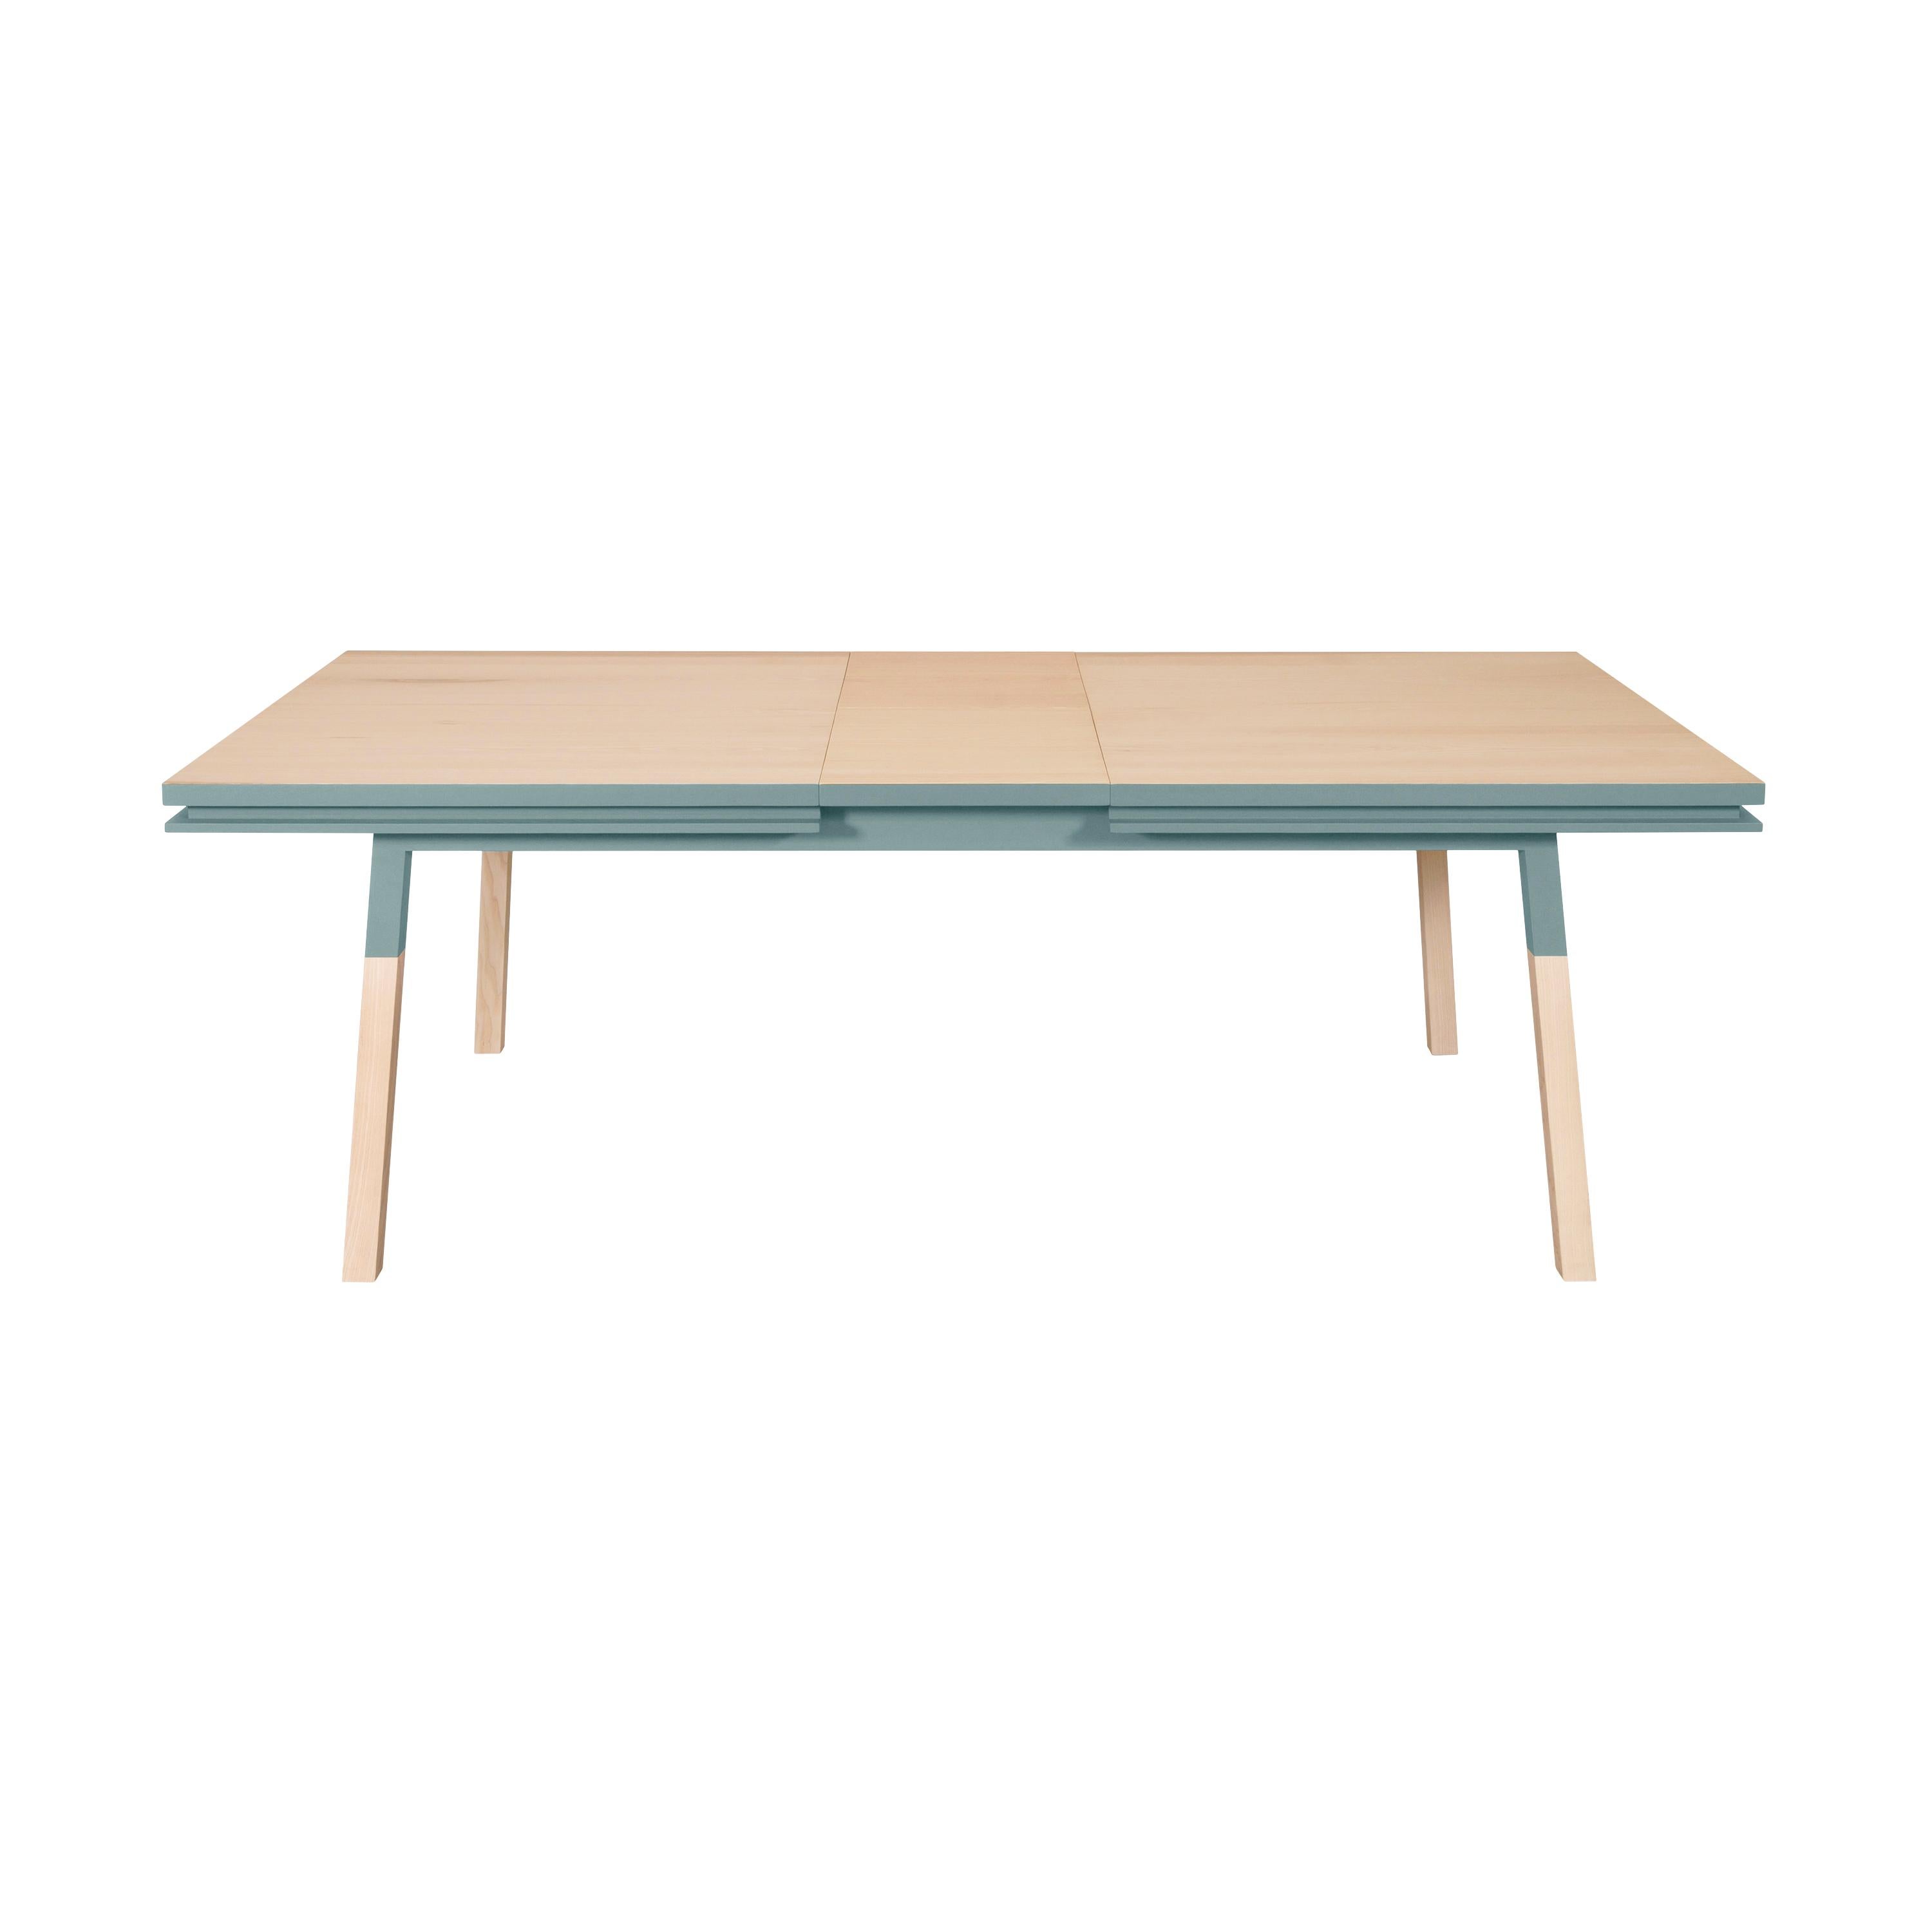 Scandinavian Modern Dining Table in Solid Ash Wood, Design by Eric Gizard, 100% Made in France For Sale